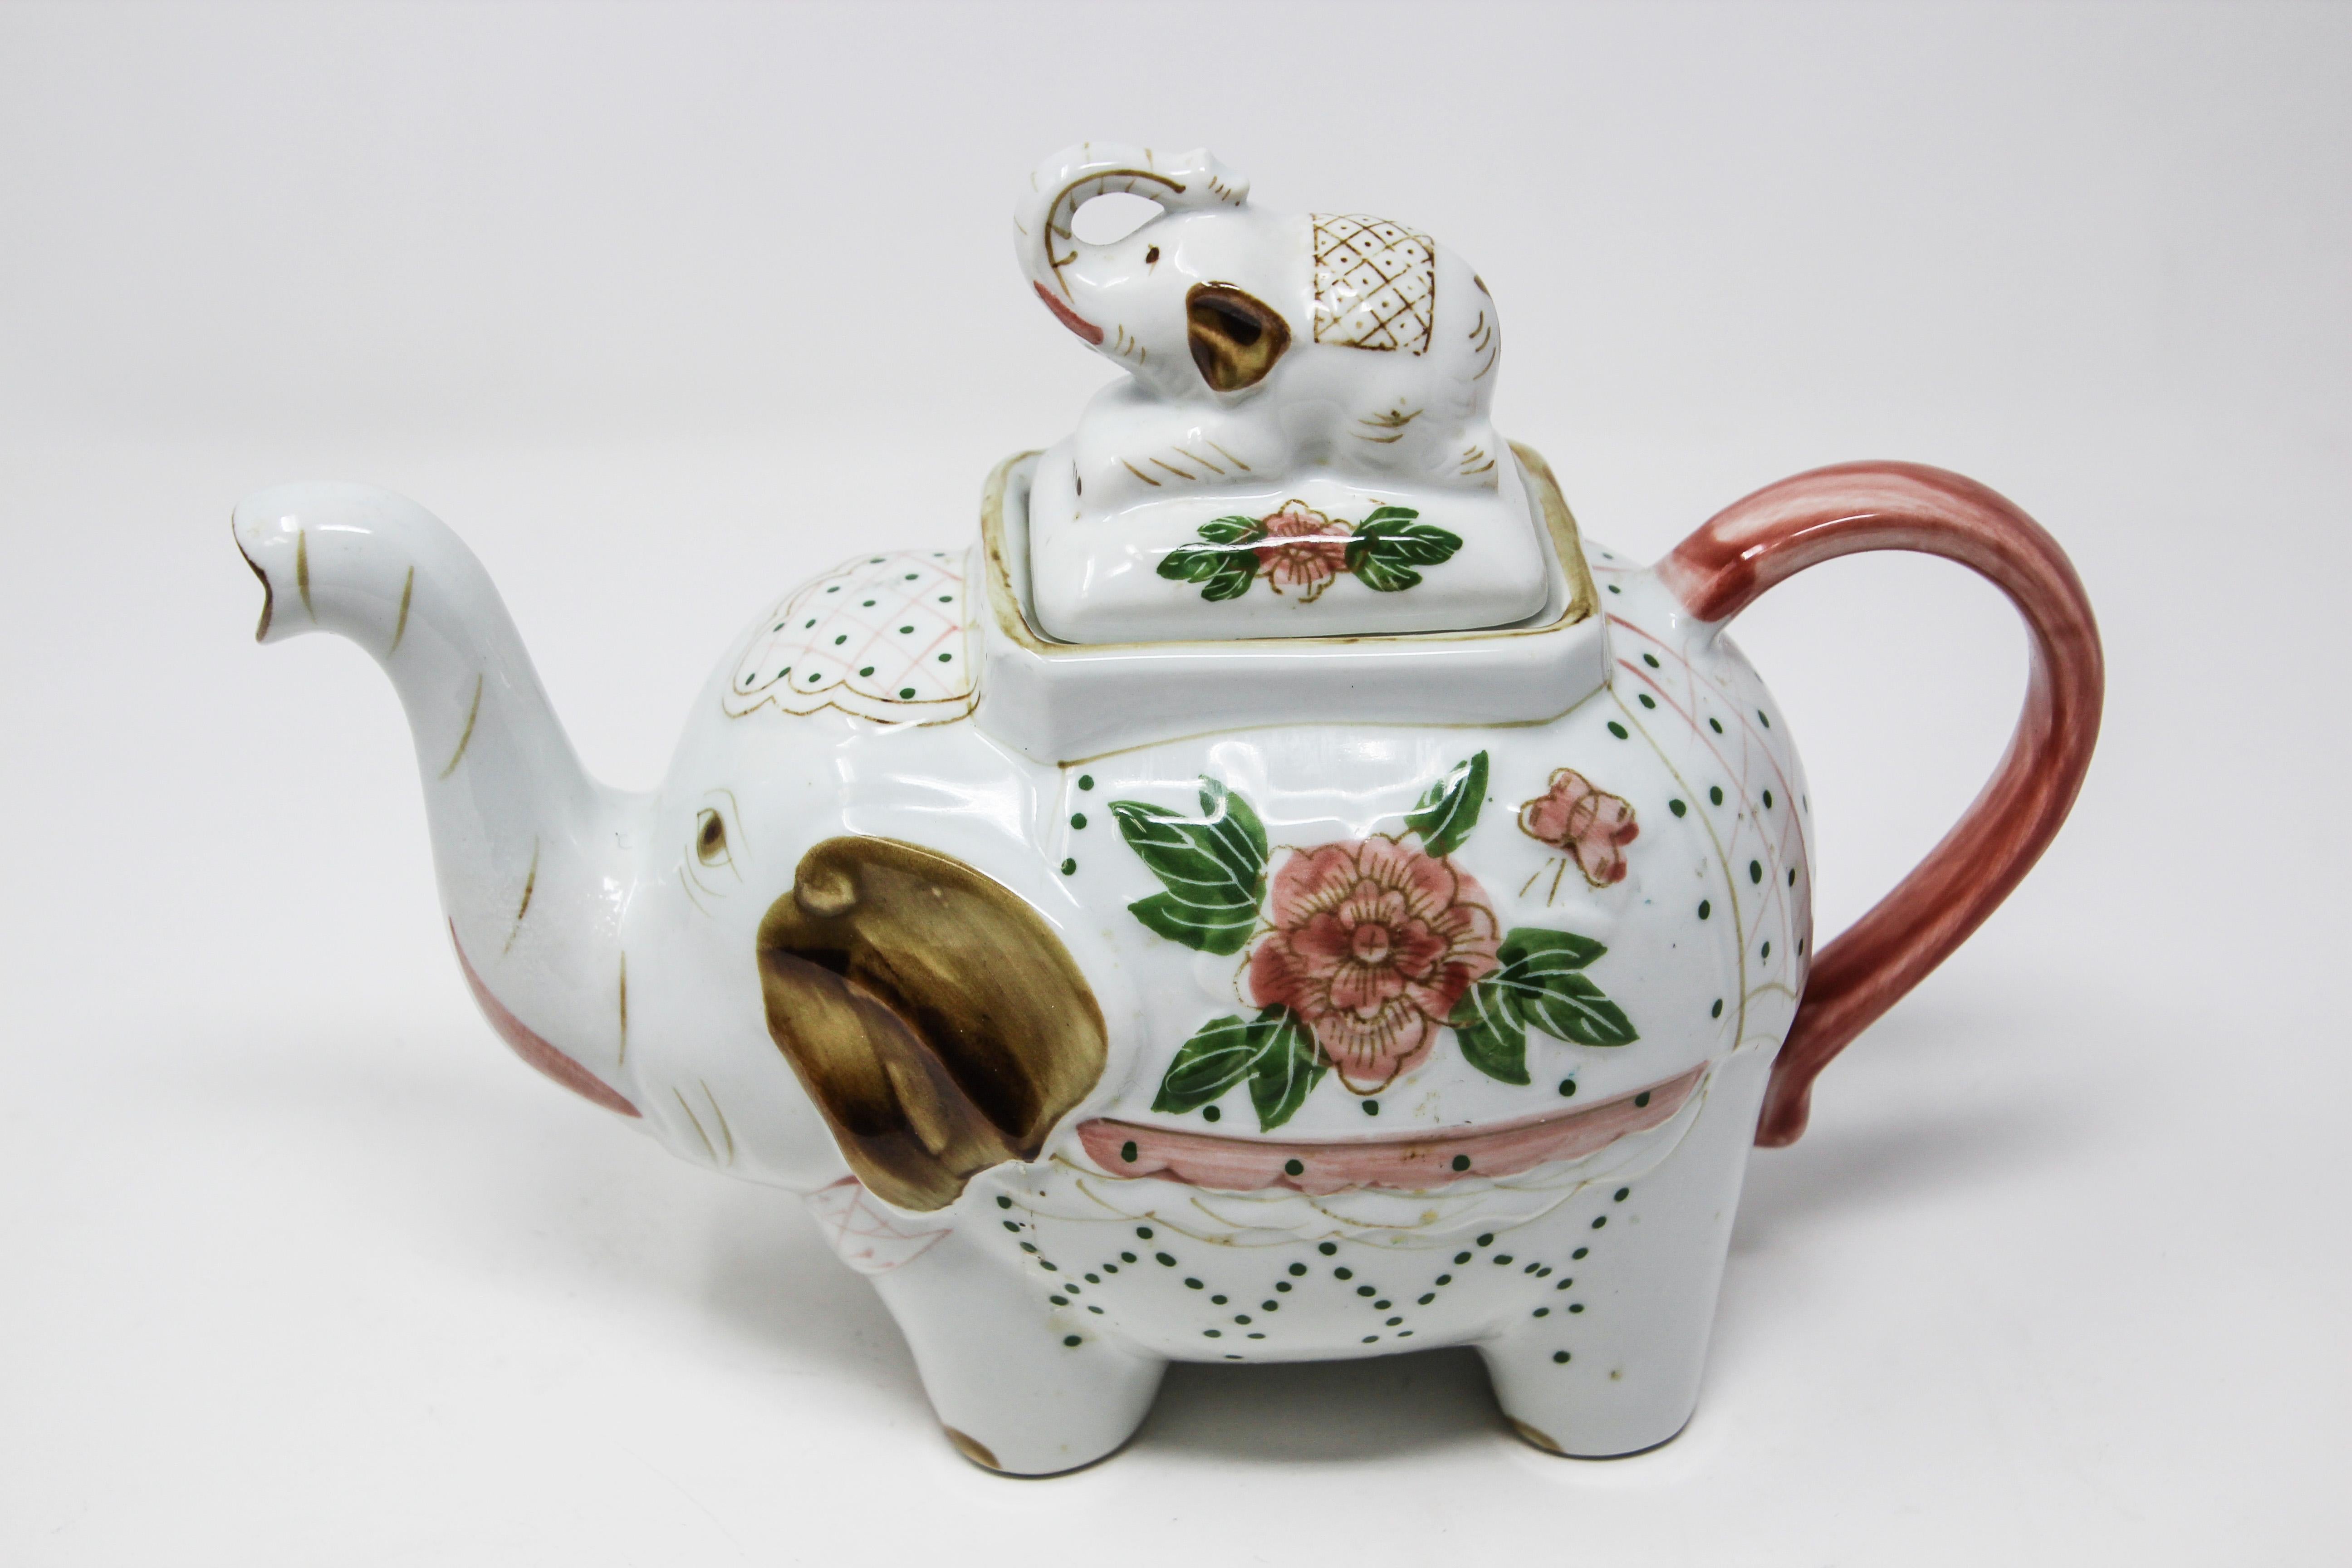 Vintage Victorian style porcelain teapot in the form of an elephant carrying a baby elephant.
Vintage elephant tea pot with beautiful Victorian style flower design.
This wonderful oriental ceramic tea pot is modeled as a standing elephant carrying